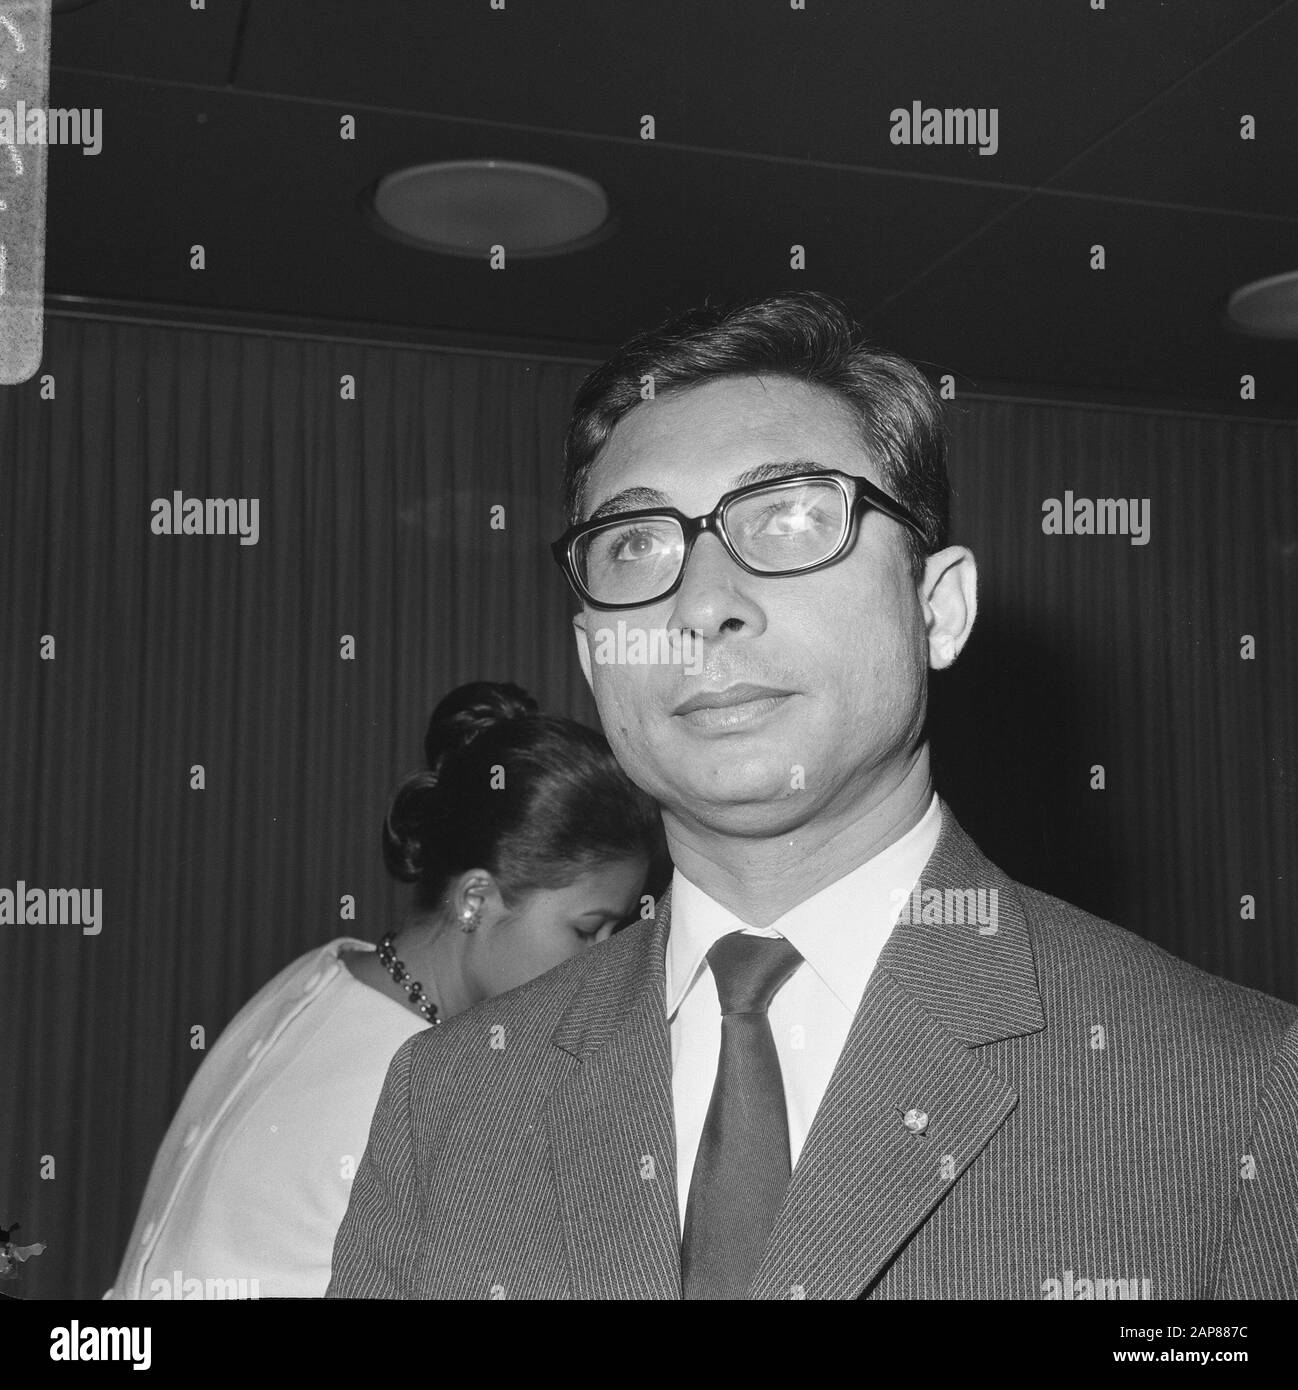 Arrival wife and children of Minister Plenipotentiary of Suriname Lim a Po at Schiphol Airport. Minister Lim a Po Date: 18 July 1968 Location: Noord-Holland, Schiphol Keywords: Wife, Children, arrivals Stock Photo